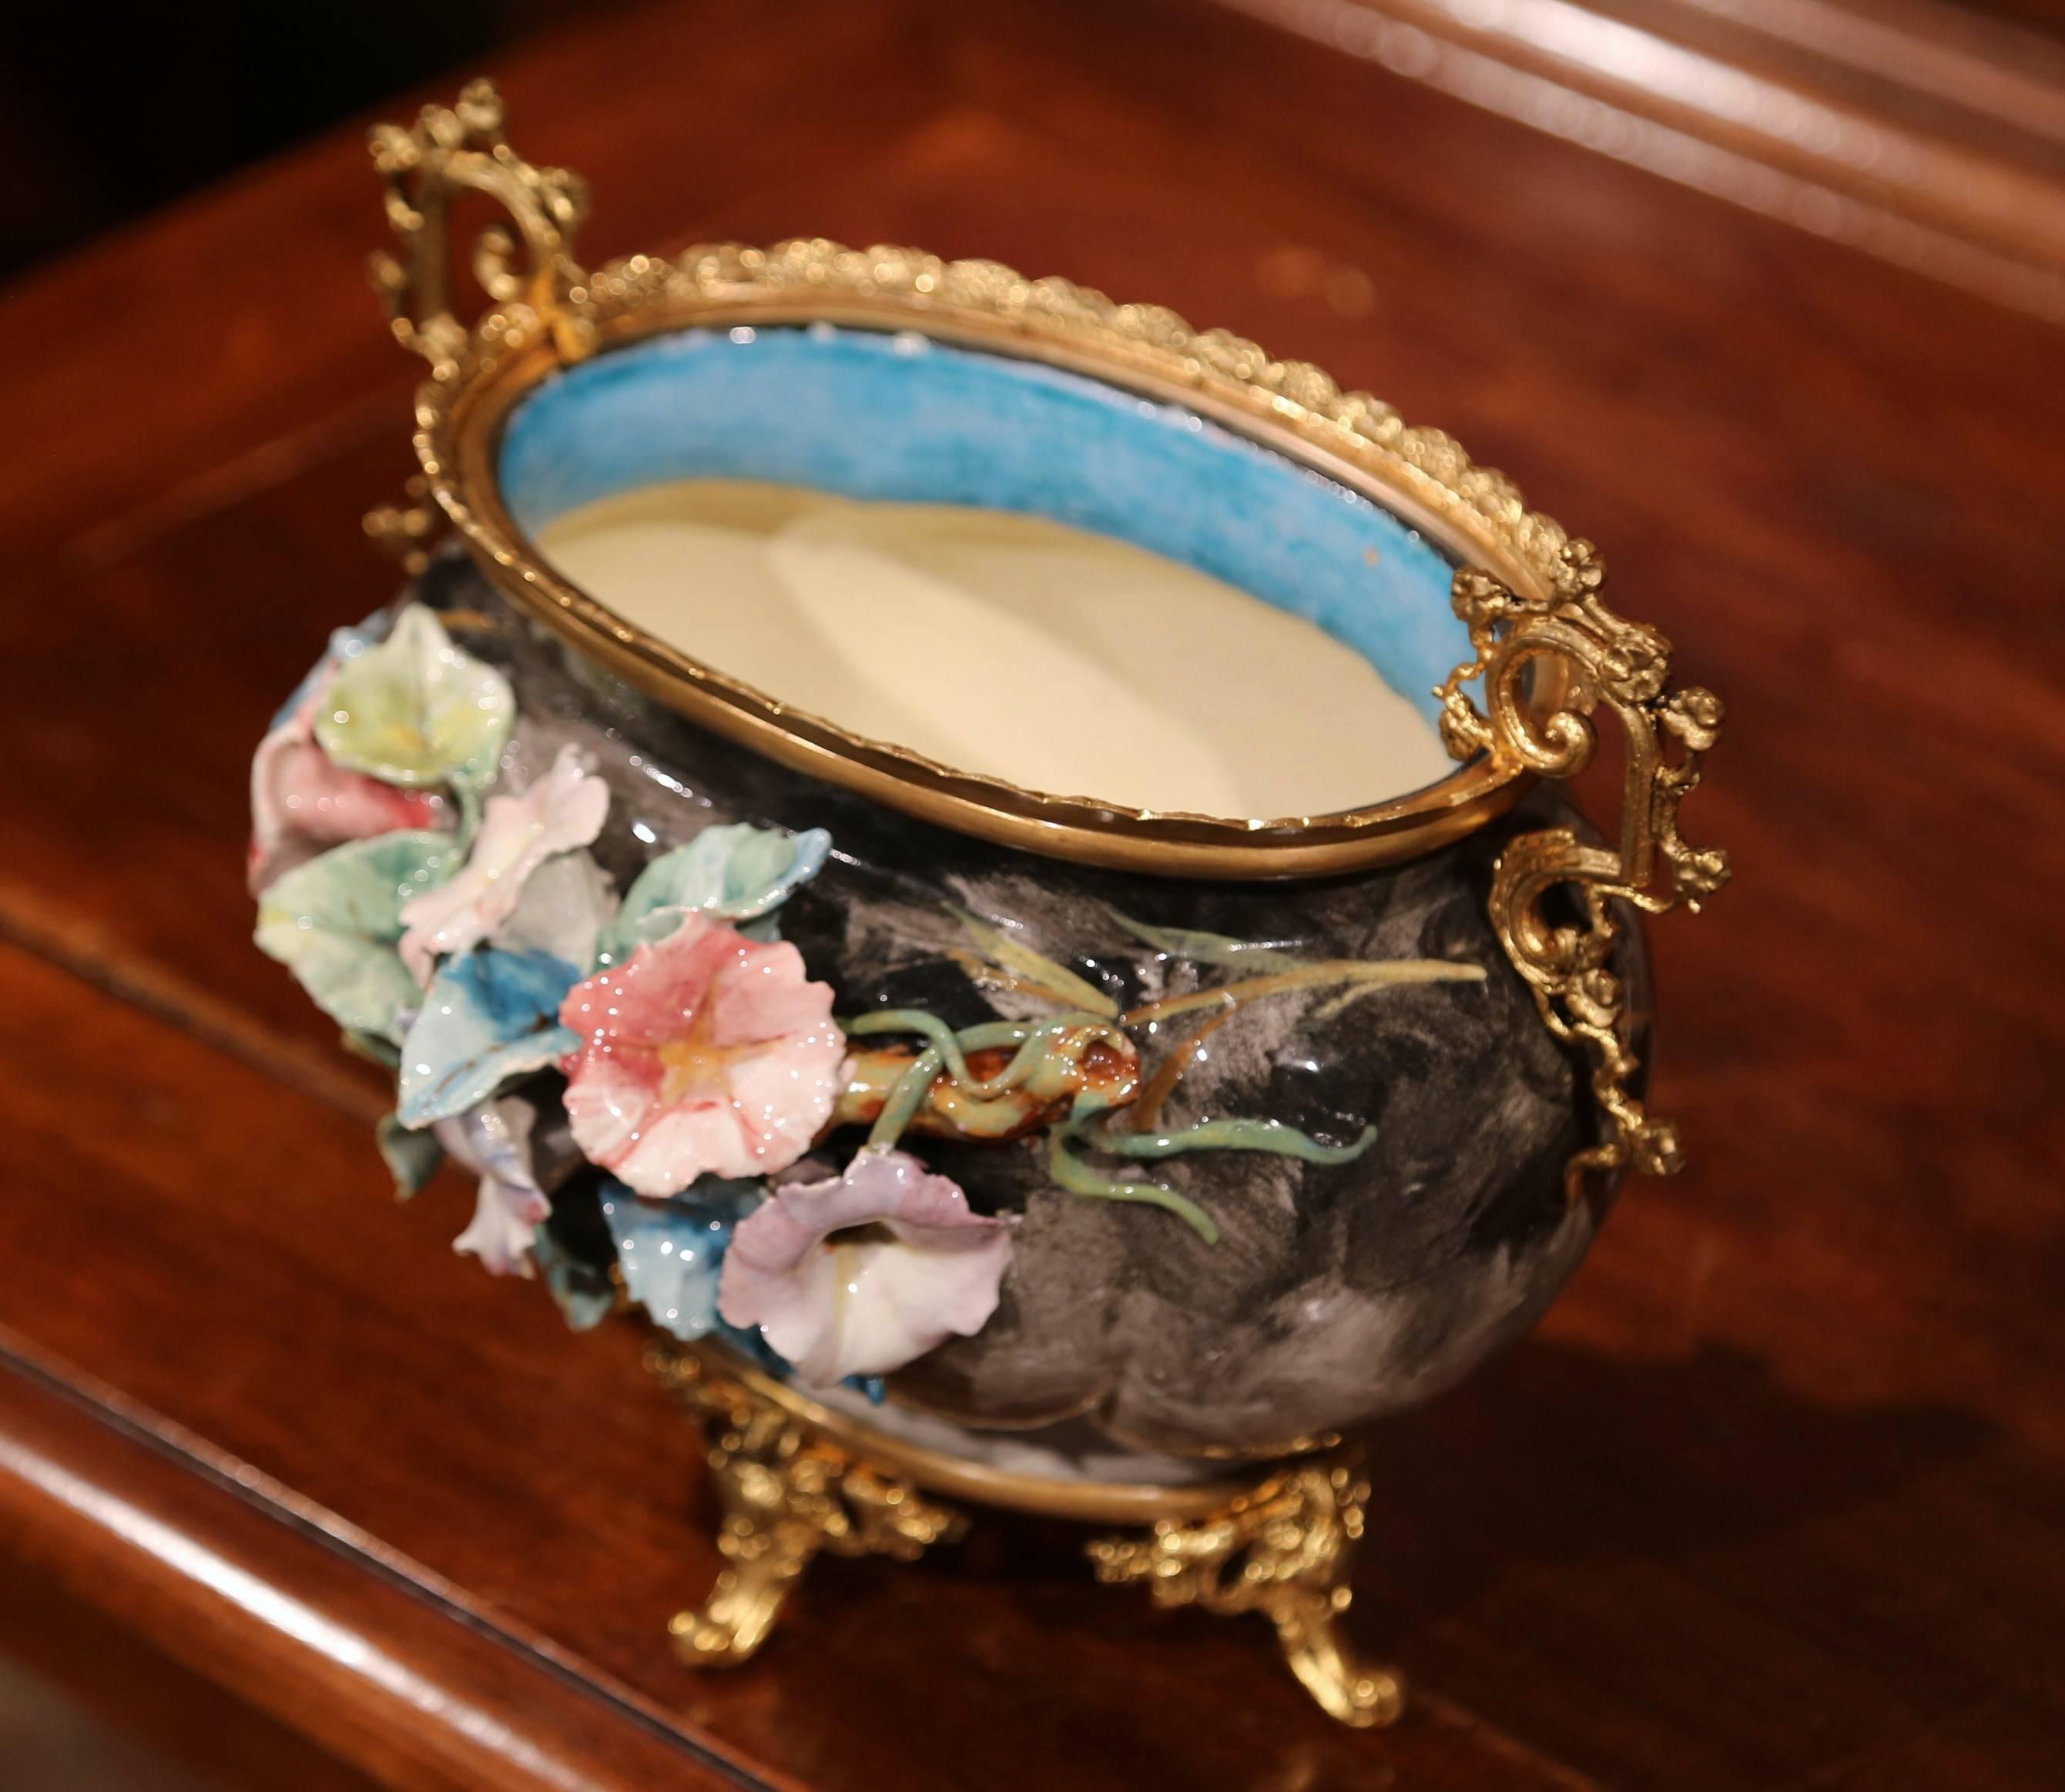 Embellish your home with this elegant antique, hand-painted Majolica planter from Montigny sur Loing, France. Sculpted, circa 1860, the ornate jardinière sit on a bronze base with four ornate scrolled feet and features colorful hand painted flowers